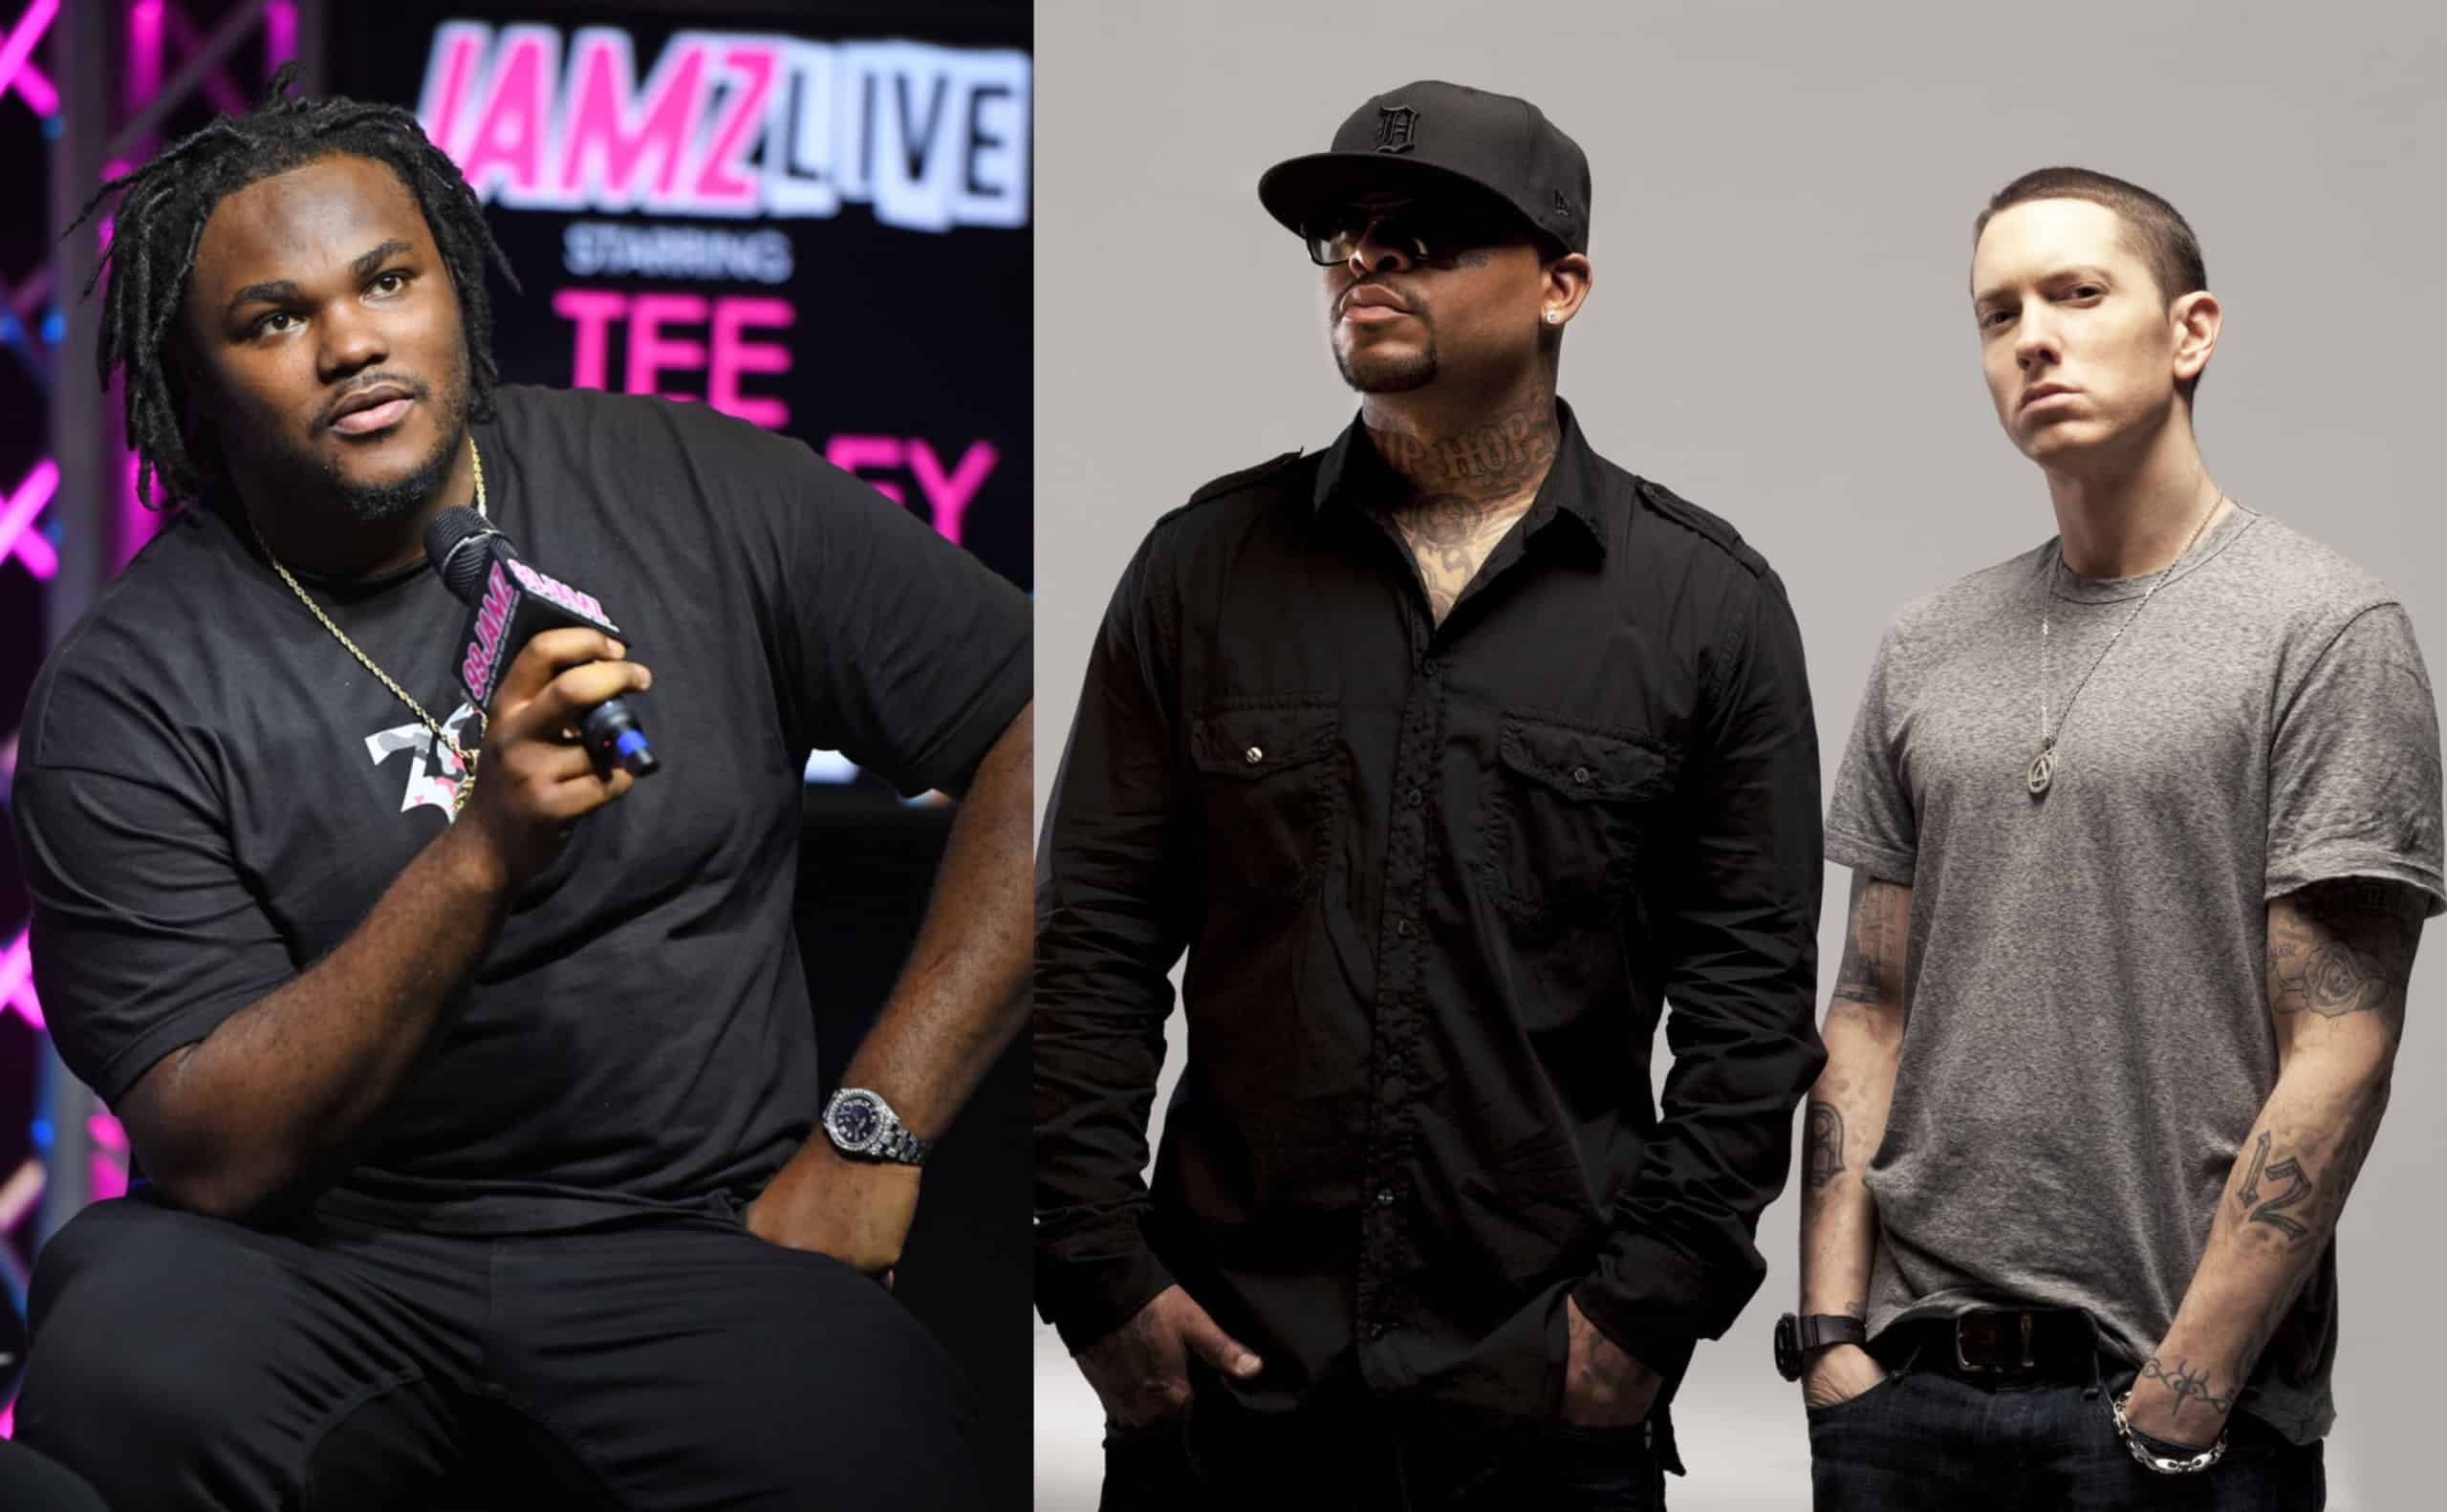 Watch Royce da 5'9 Talks About Tee Grizzley Dissing Eminem; Tee Grizzley Responds